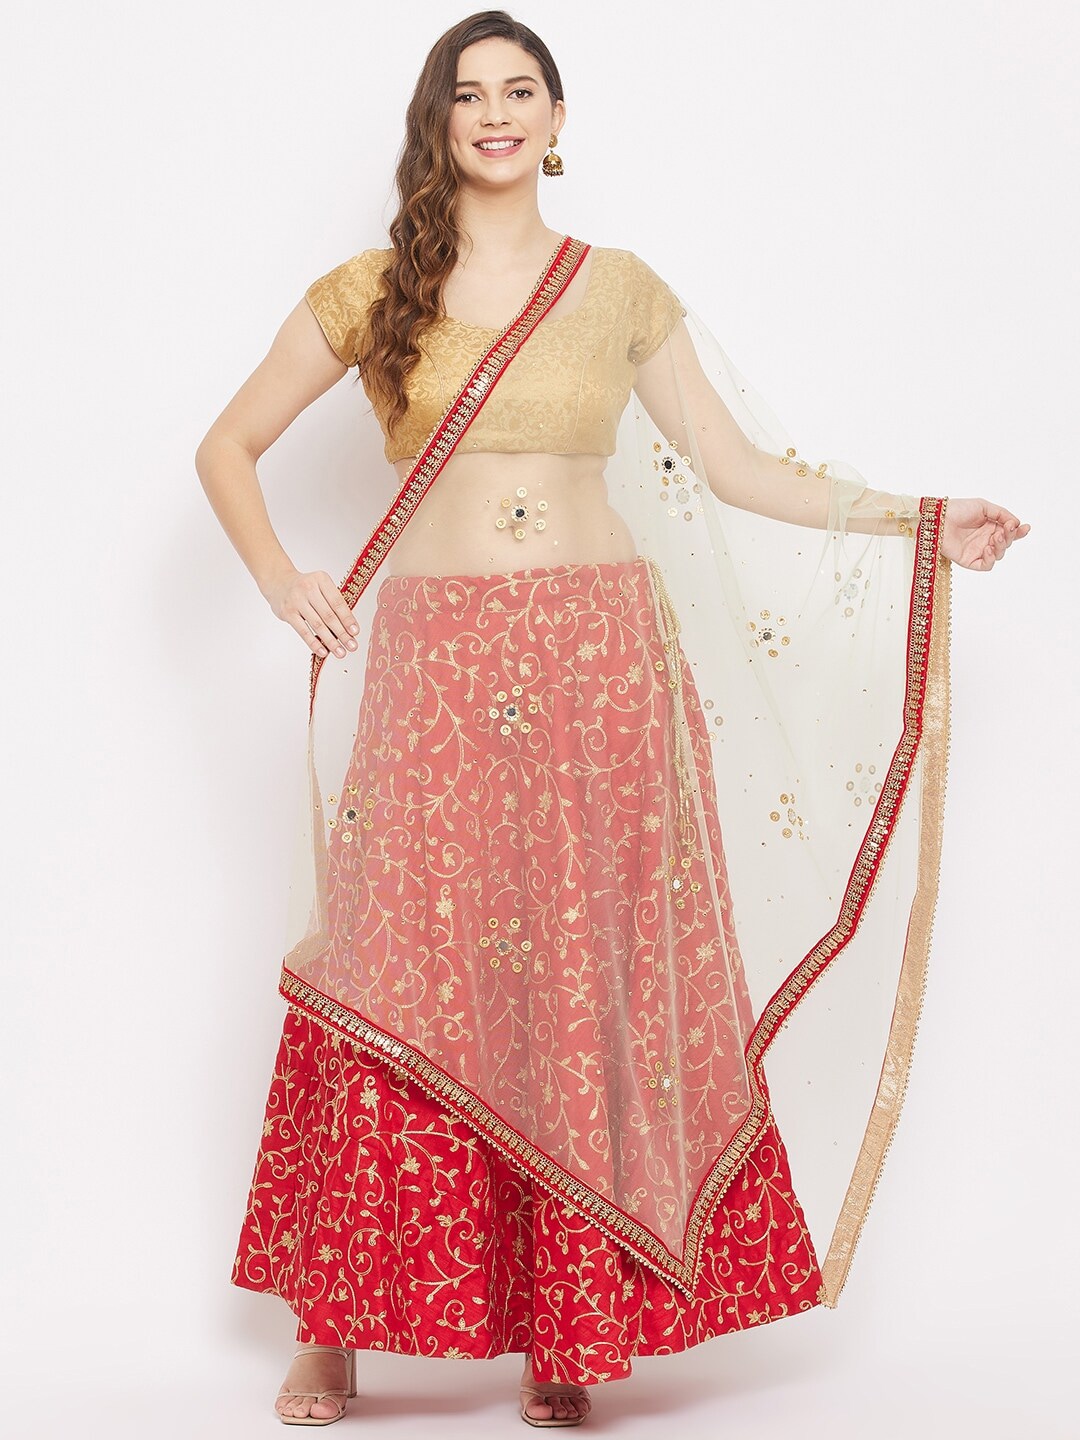 Clora Creation Gold-Toned & Red Ethnic Motifs Embroidered Dupatta with Beads and Stones Price in India